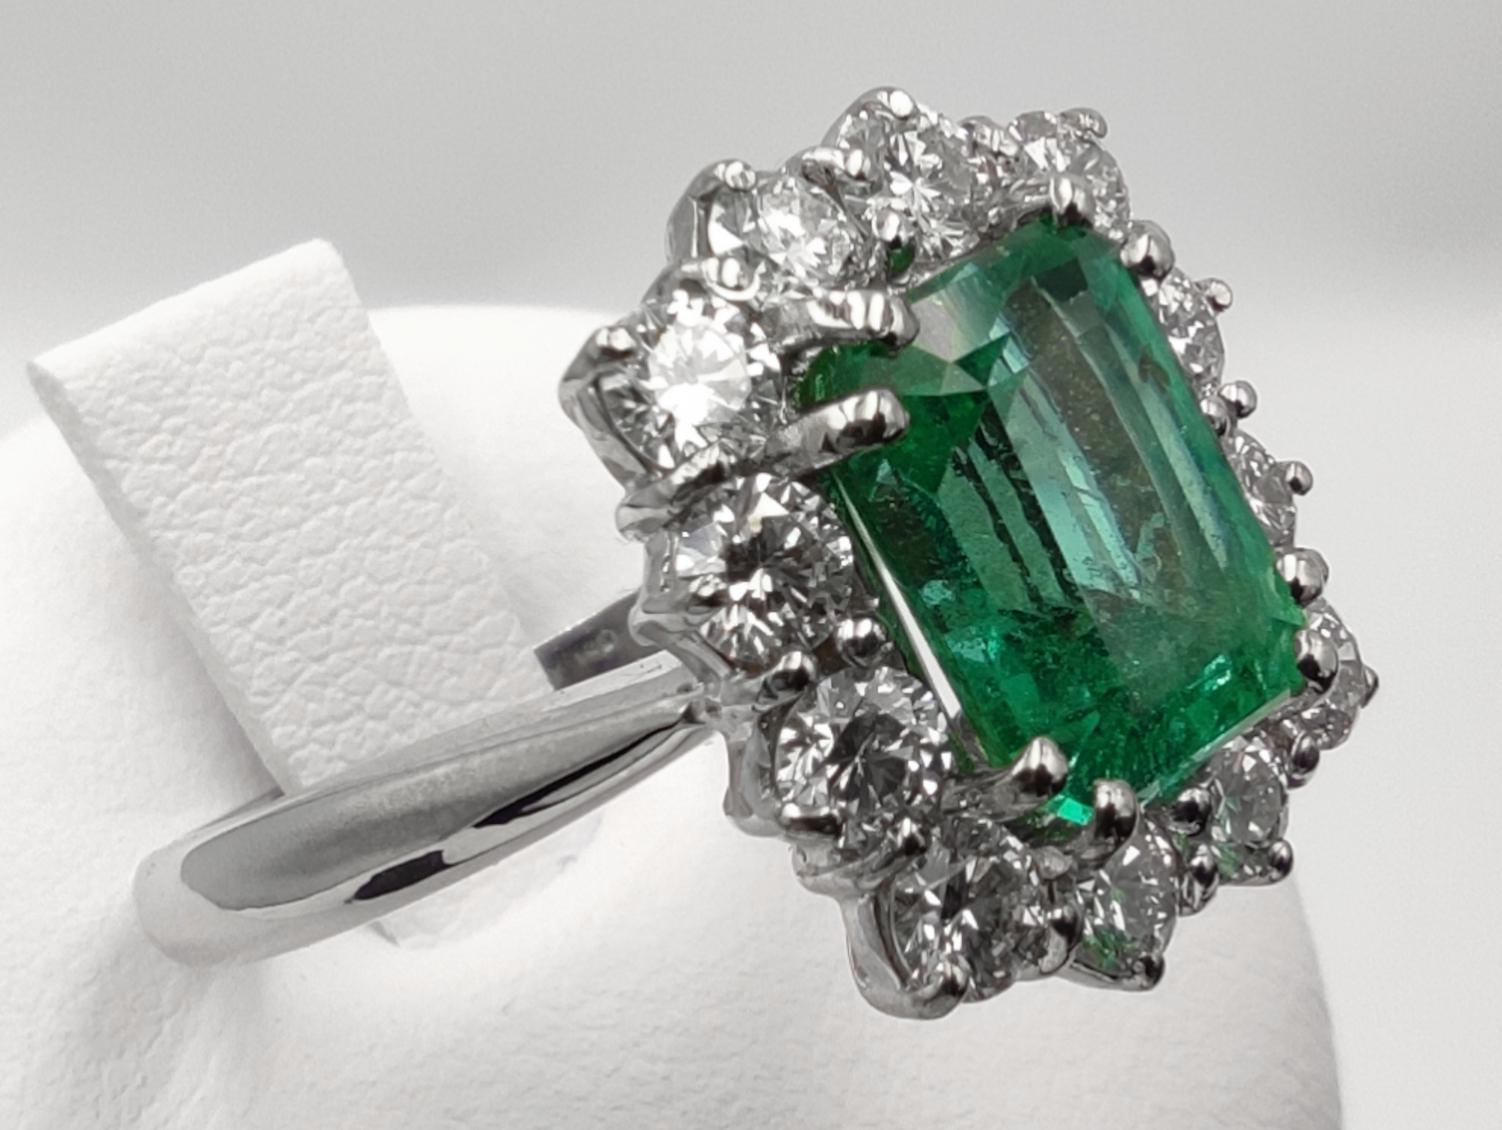 White gold ring with IGI certified minor oil 2.20 carat emerald and diamond halo.
